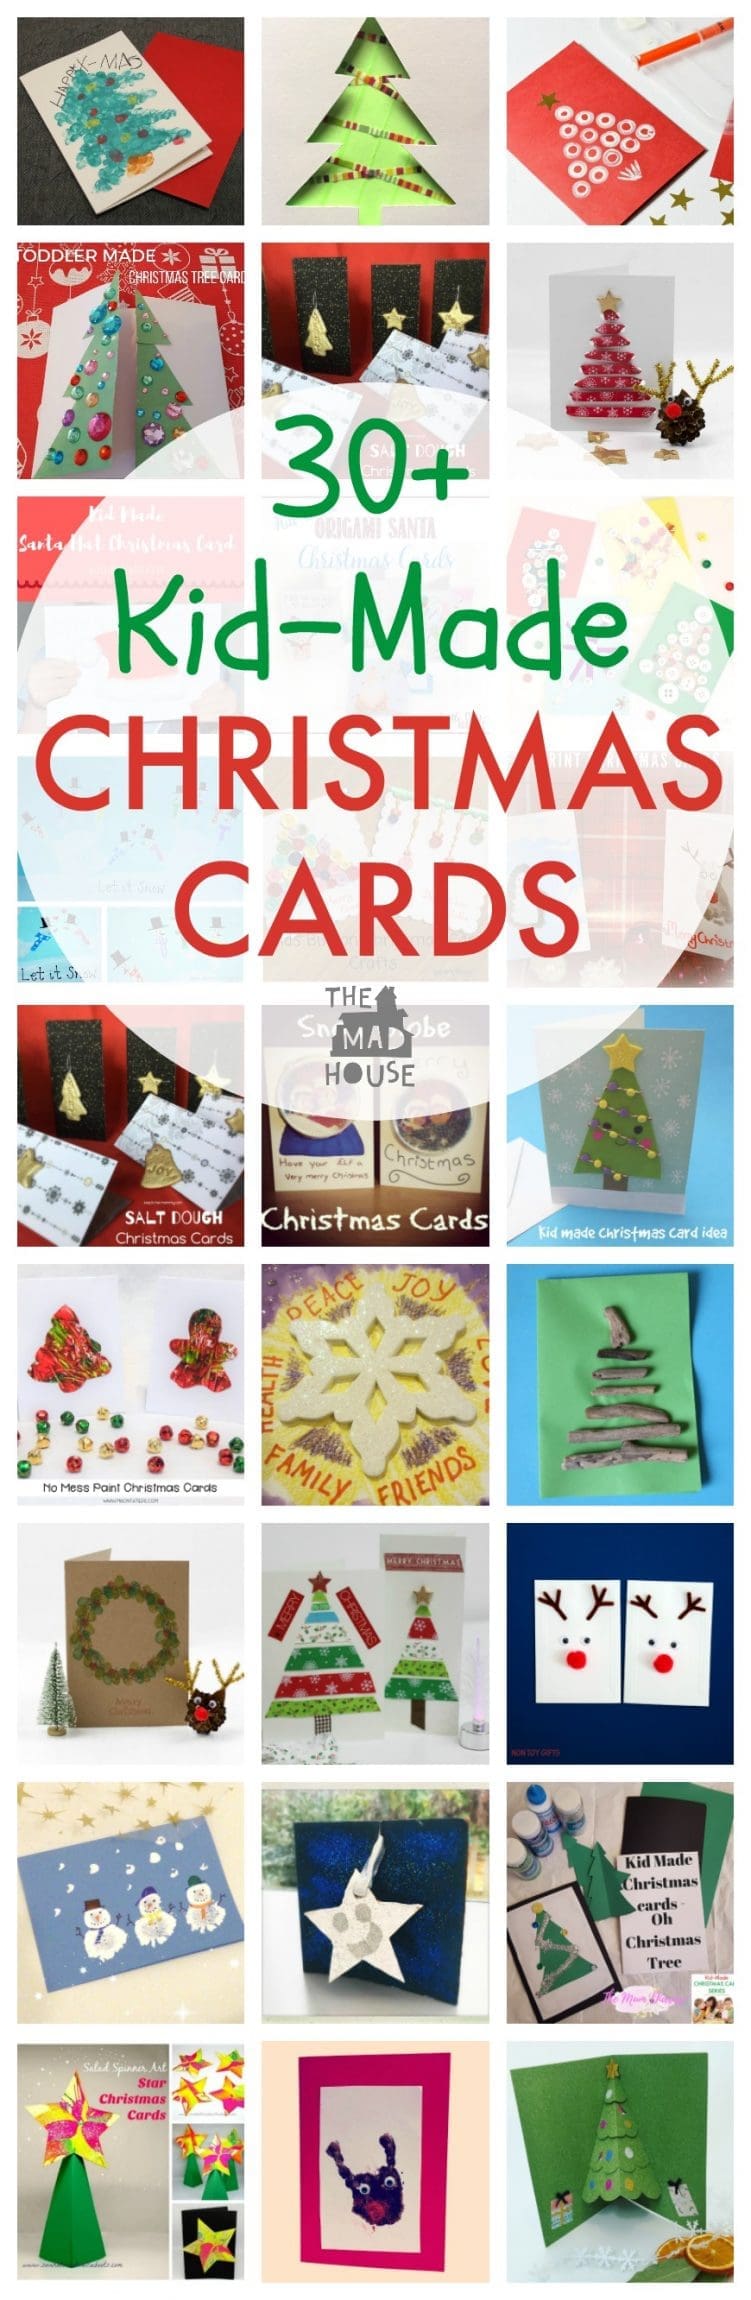 Kid-Made Christmas cards - over 30 achievable Christmas cards to craft with children. There is a card for every age and ability for the festive season. 